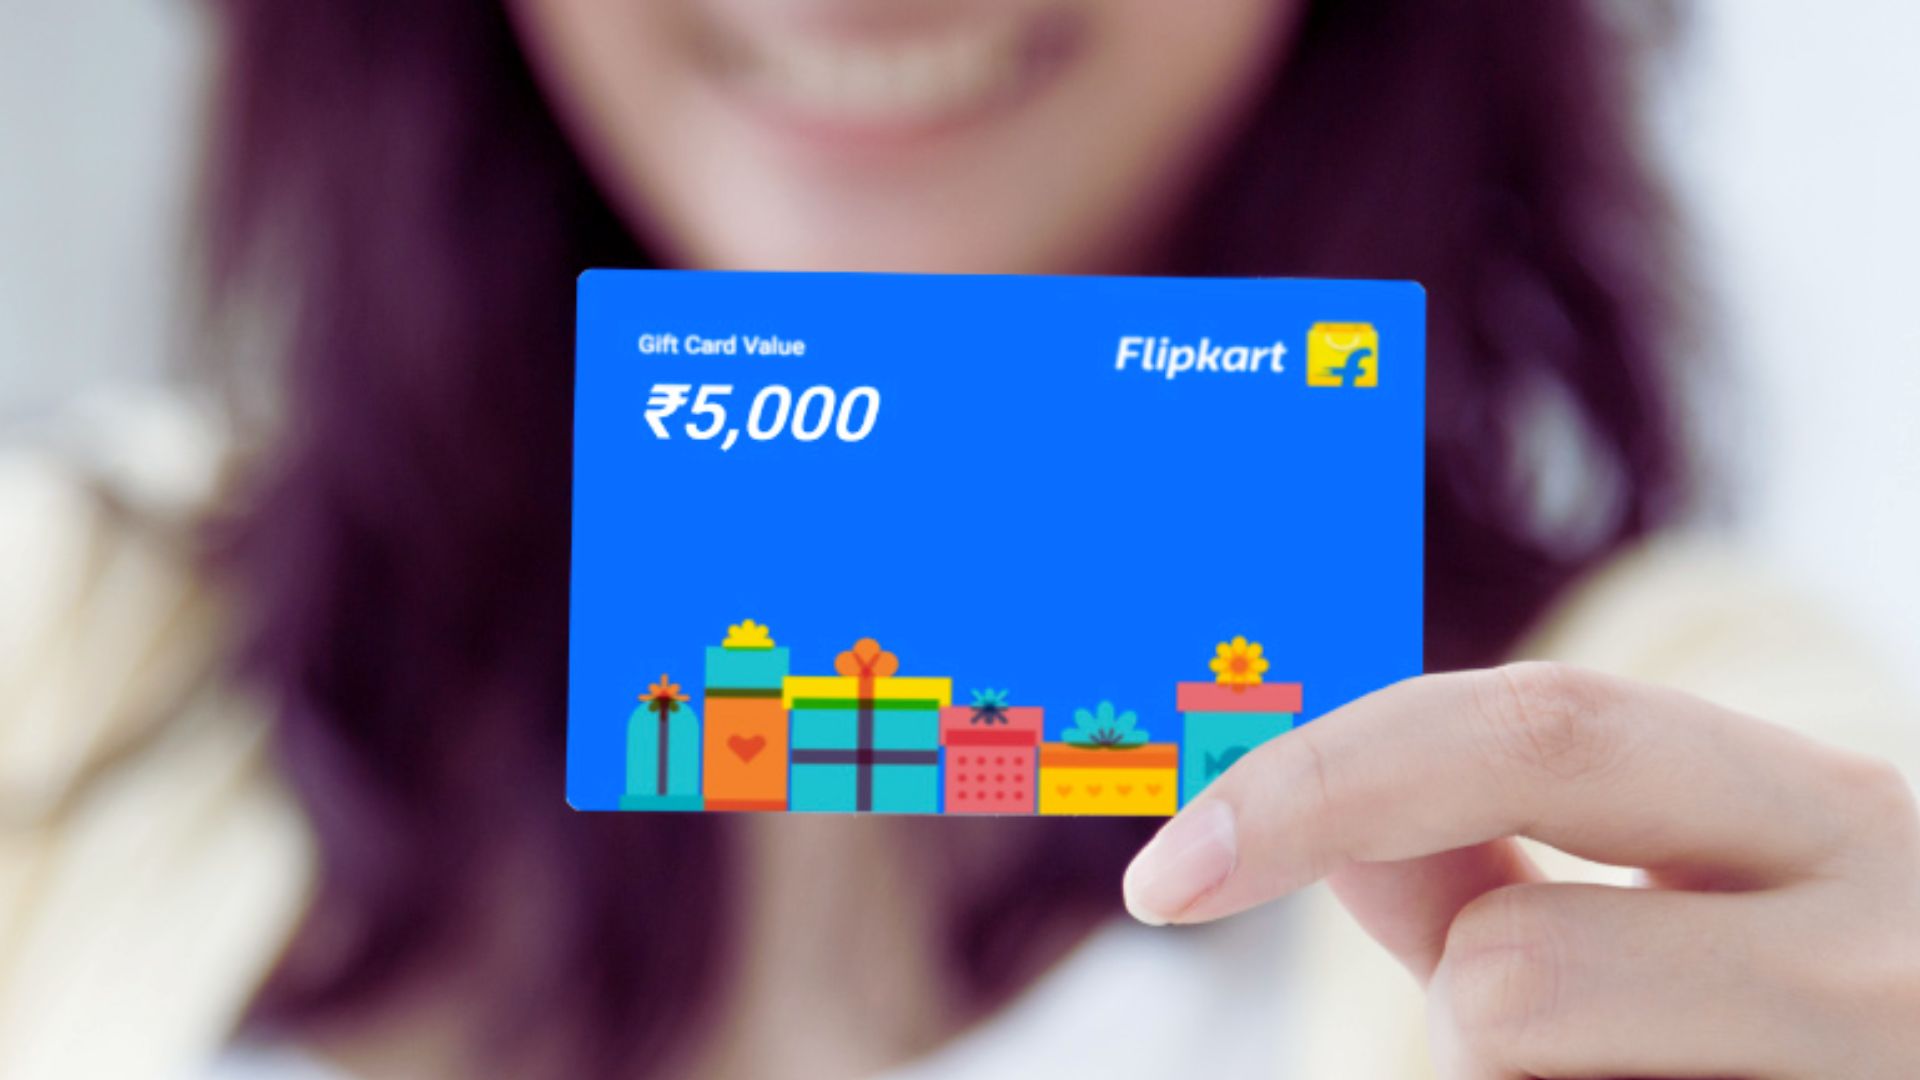 How to Add Card in Flipkart? 7 Easy Steps to Follow